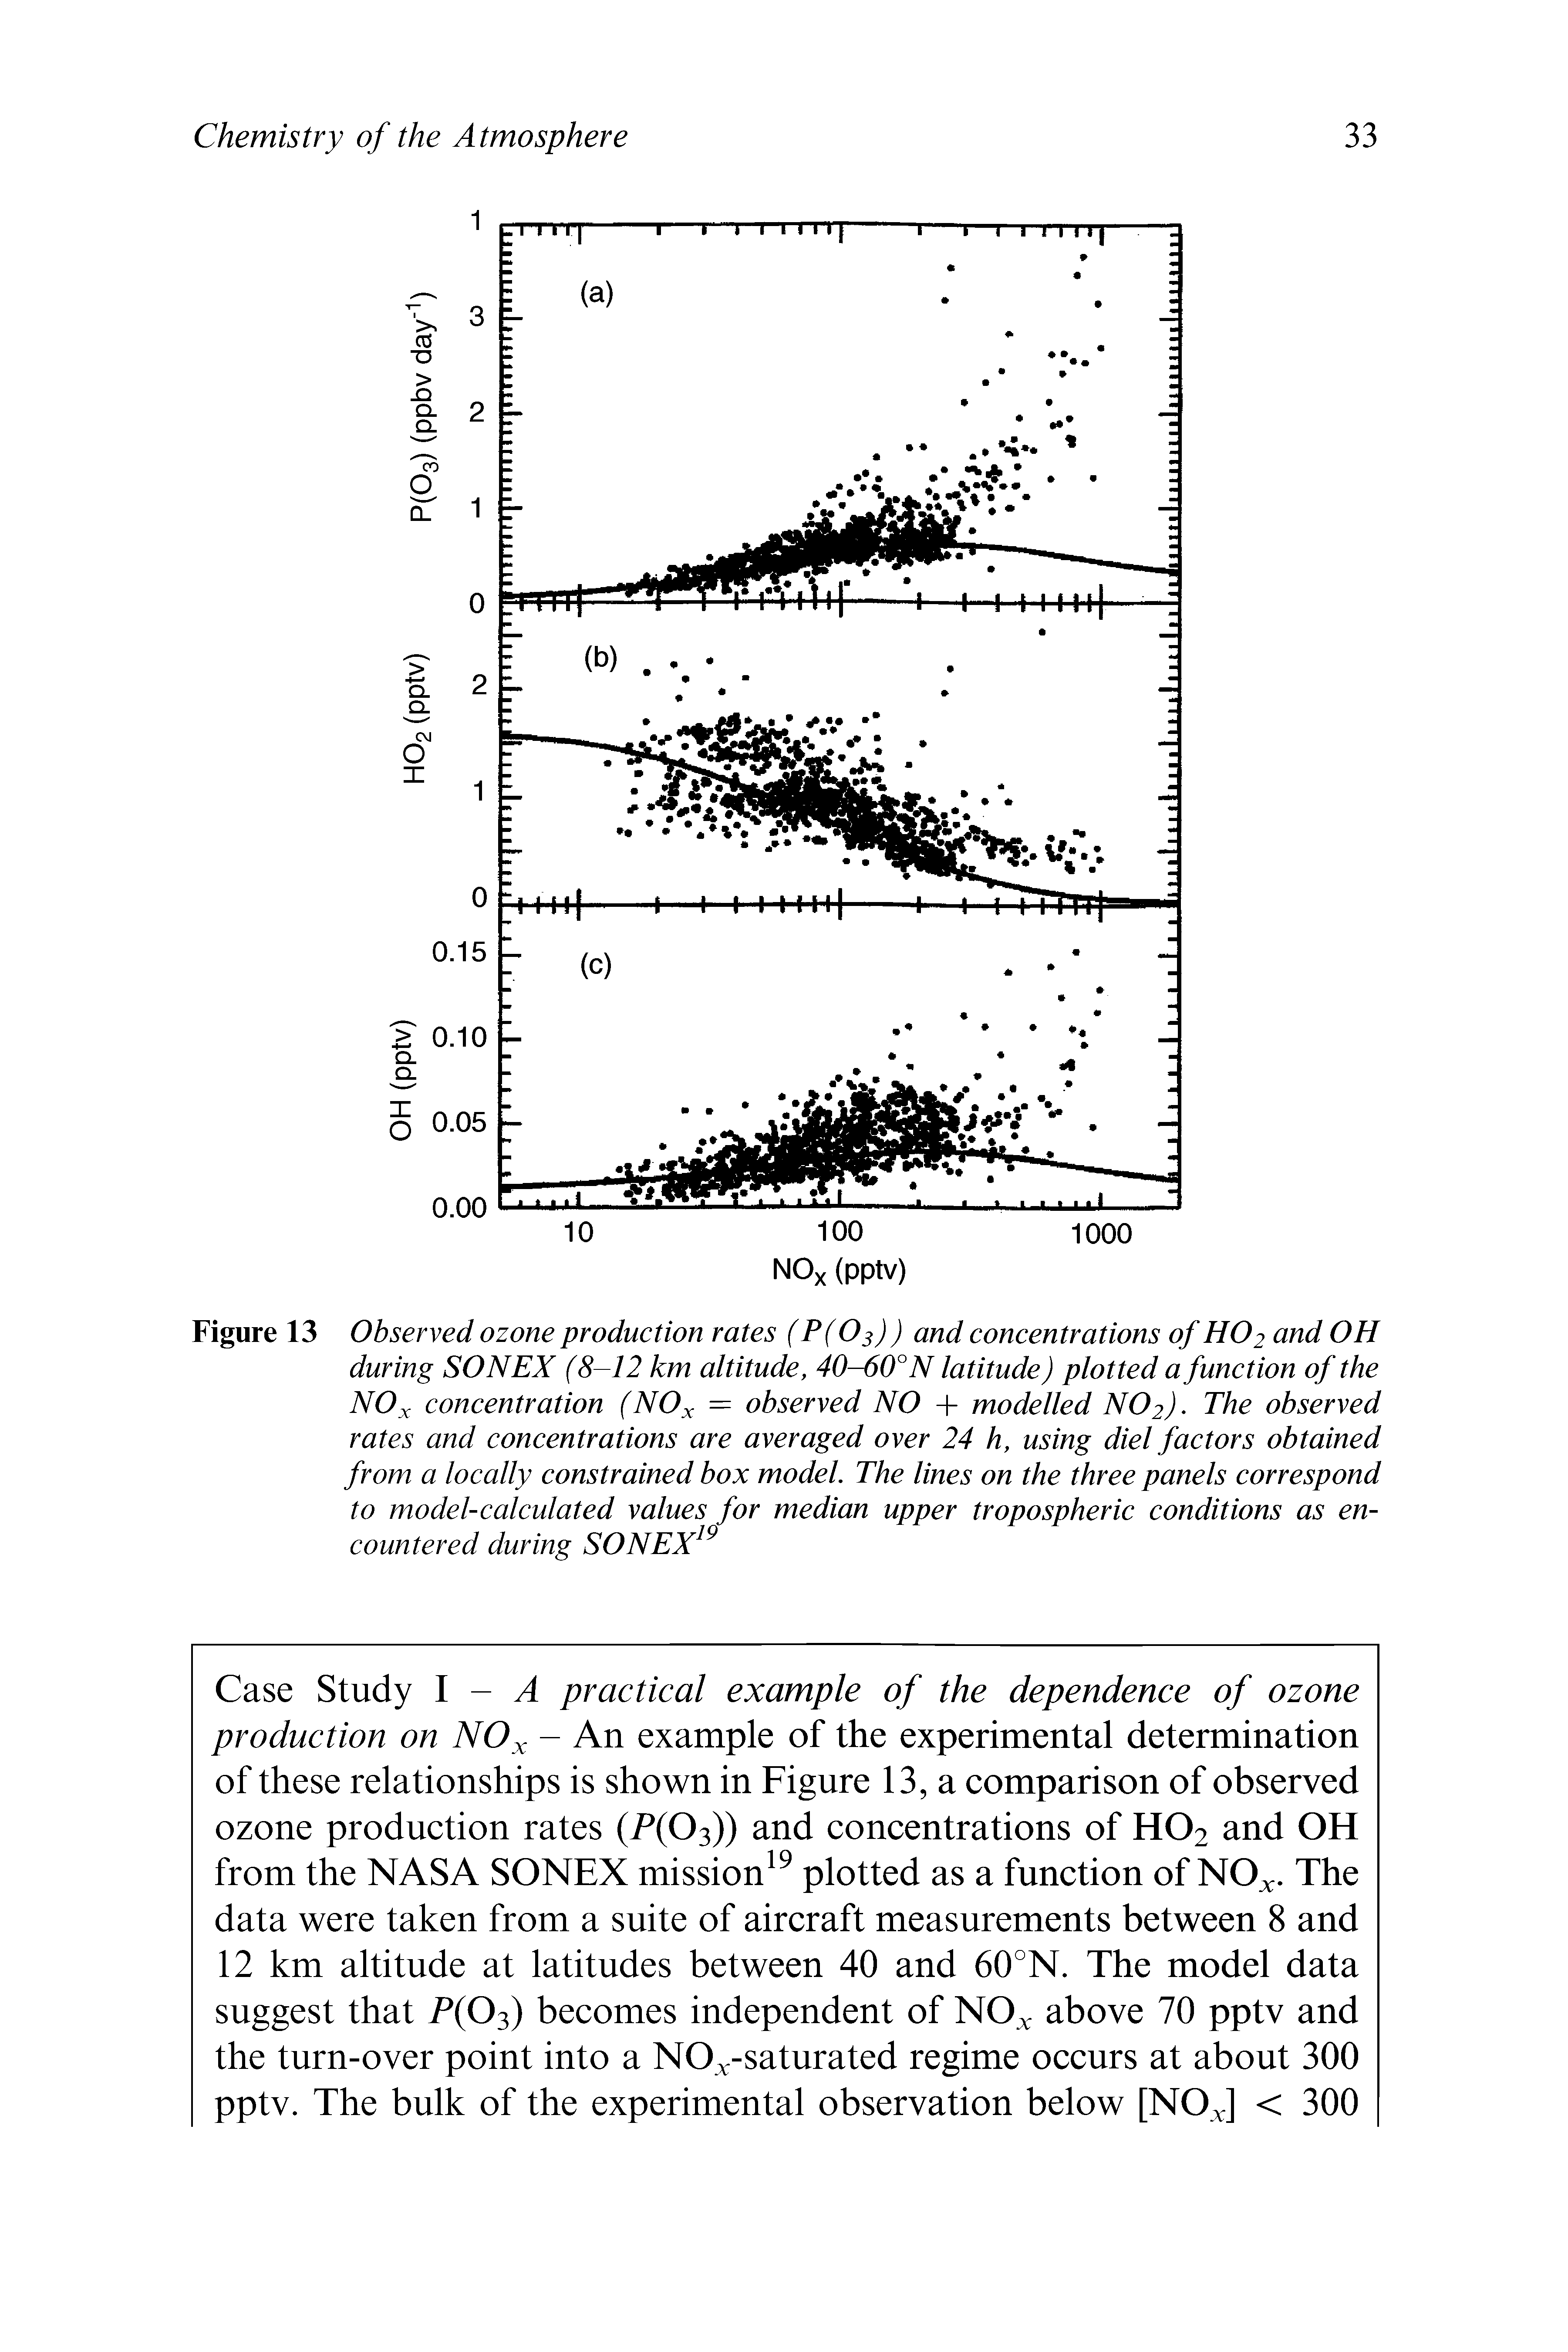 Figure 13 Observed ozone production rates (P(03)) and concentrations of HO 2 and OH during SONEX (8-12 km altitude, 40-60° N latitude) plotted a function of the NOx concentration (NOx = observed NO + modelled NO2) The observed rates and concentrations are averaged over 24 h, using did factors obtained from a locally constrained box model. The lines on the three panels correspond to model-calculated values for median upper tropospheric conditions as encountered during SONEX ...